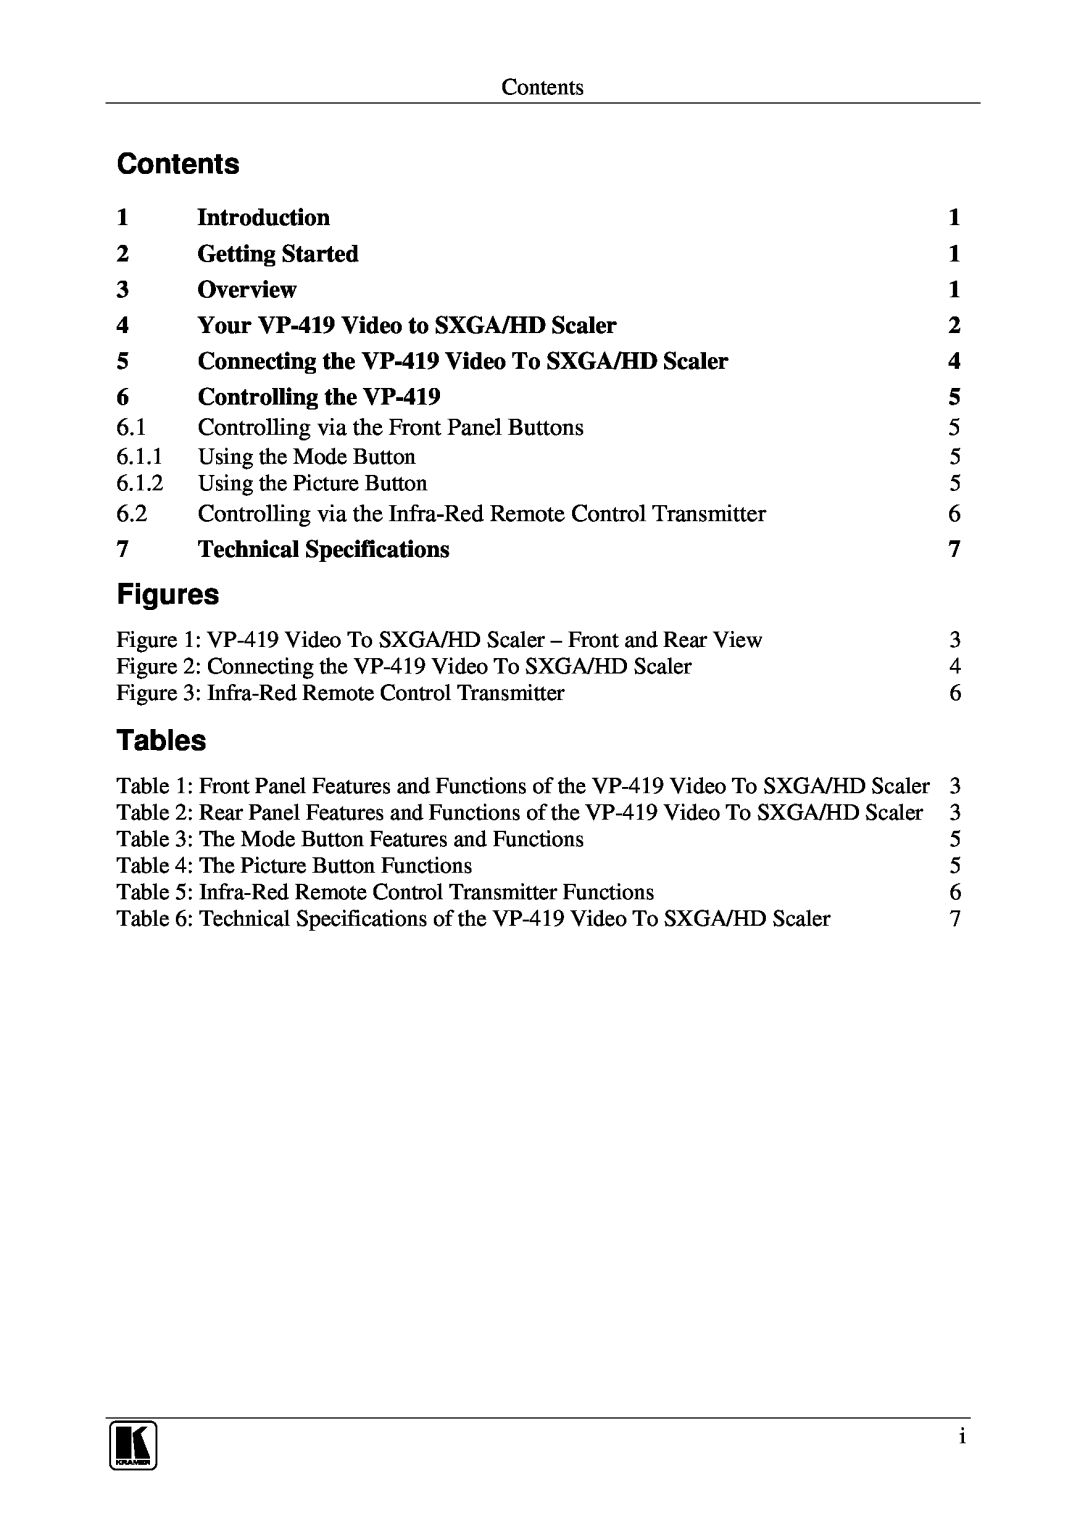 Kramer Electronics Contents, Figures, Tables, Introduction, Getting Started, Overview, Controlling the VP-419 